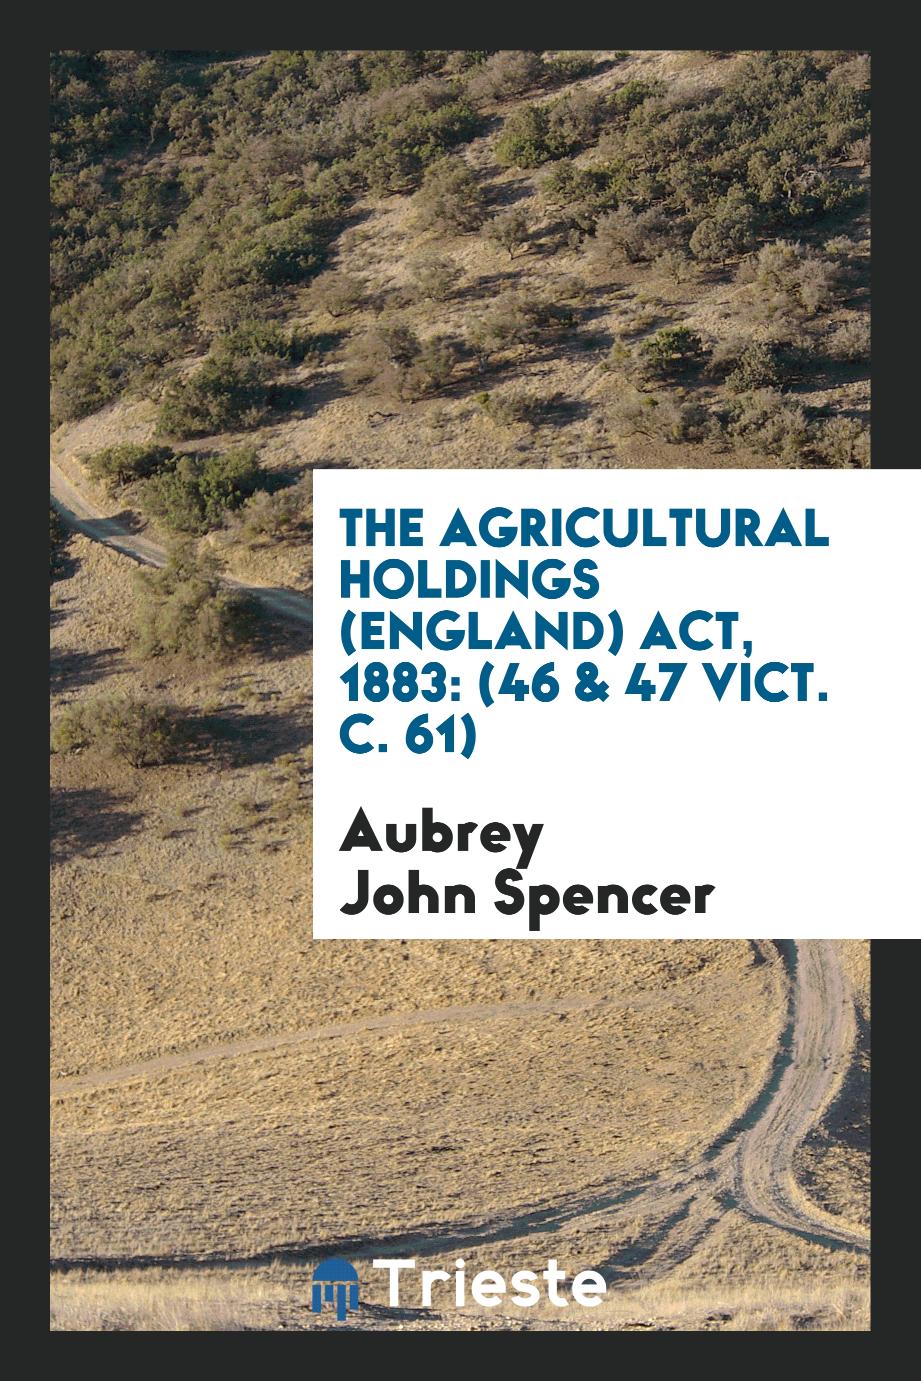 The Agricultural Holdings (England) Act, 1883: (46 & 47 Vict. C. 61)